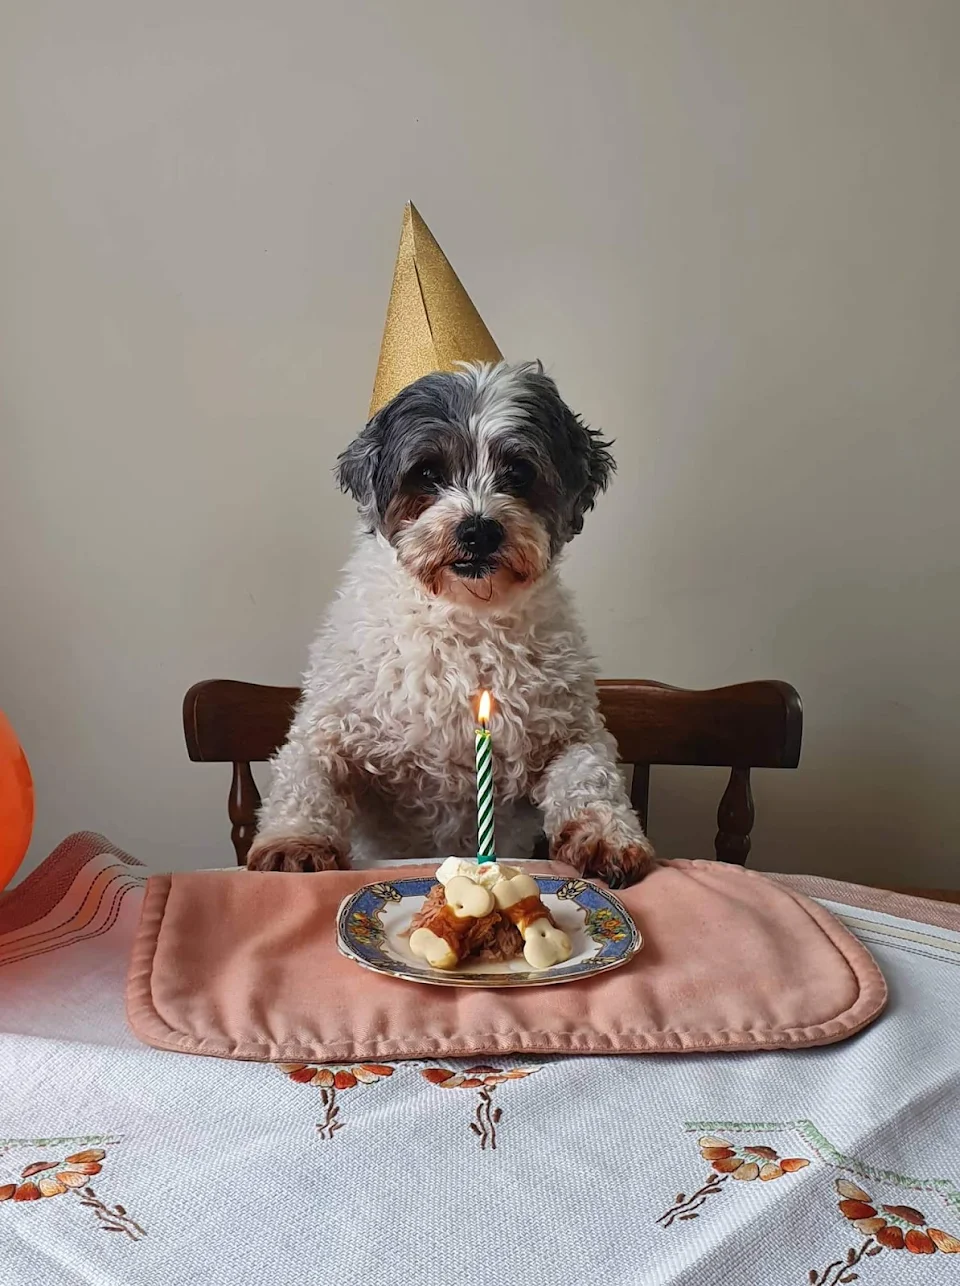 My parents dog, now an old man celebrating his 15th birthday.